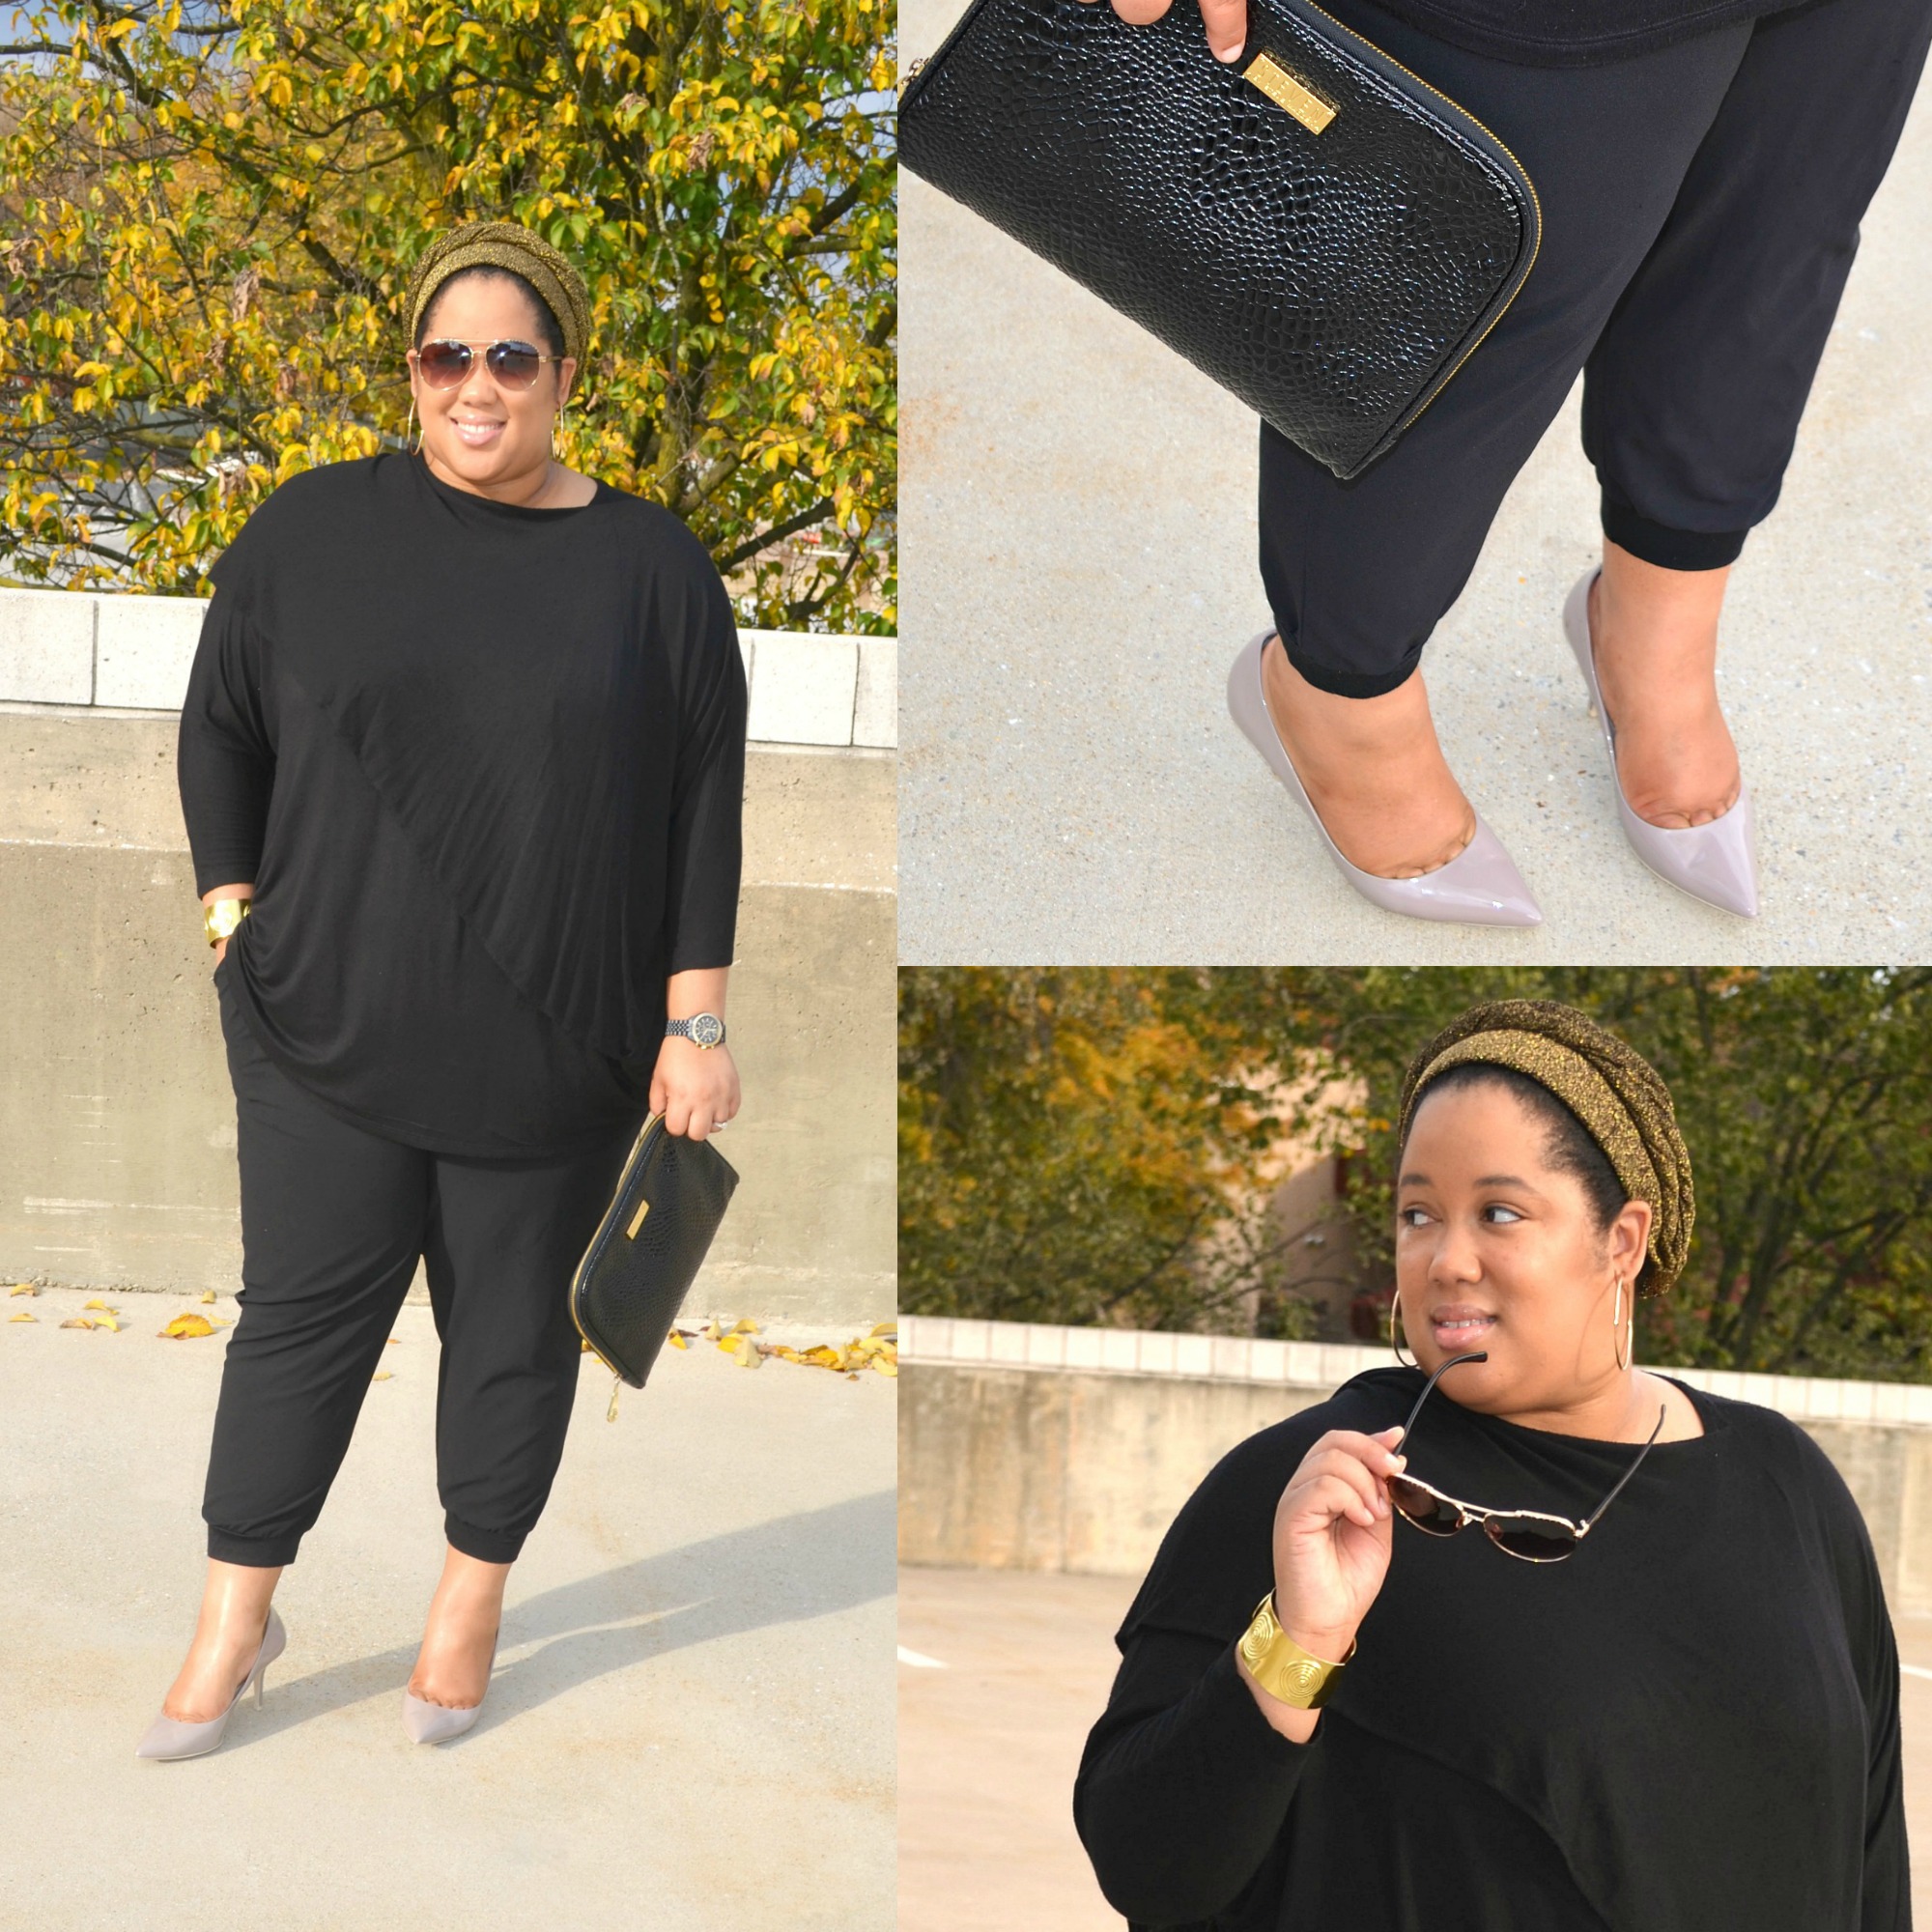 Details - All Black Outfit